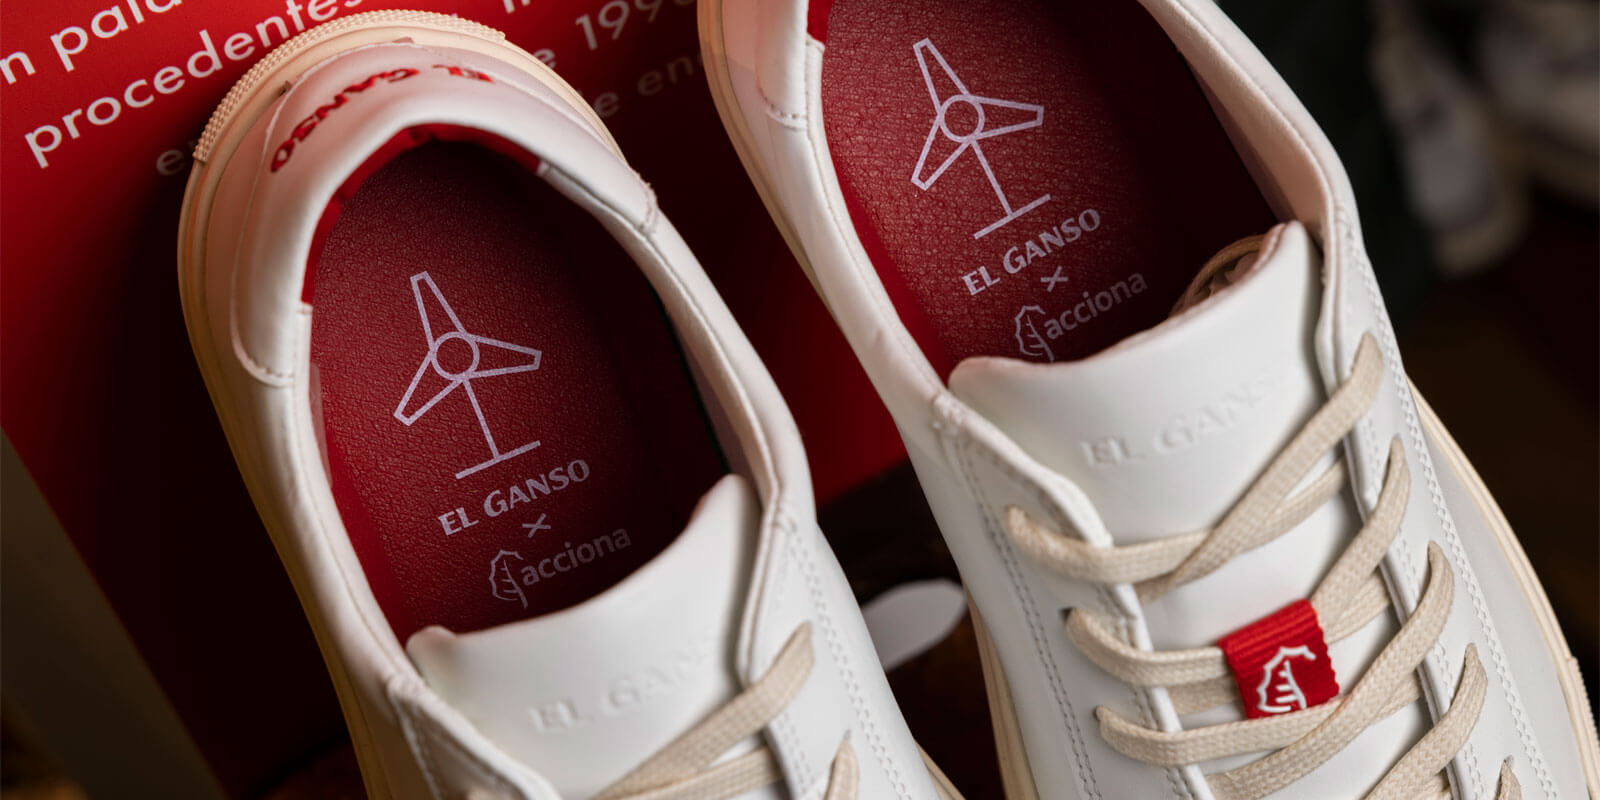 ACCIONA Energía and El Ganso launch world's first shoes made with recycled  wind blades